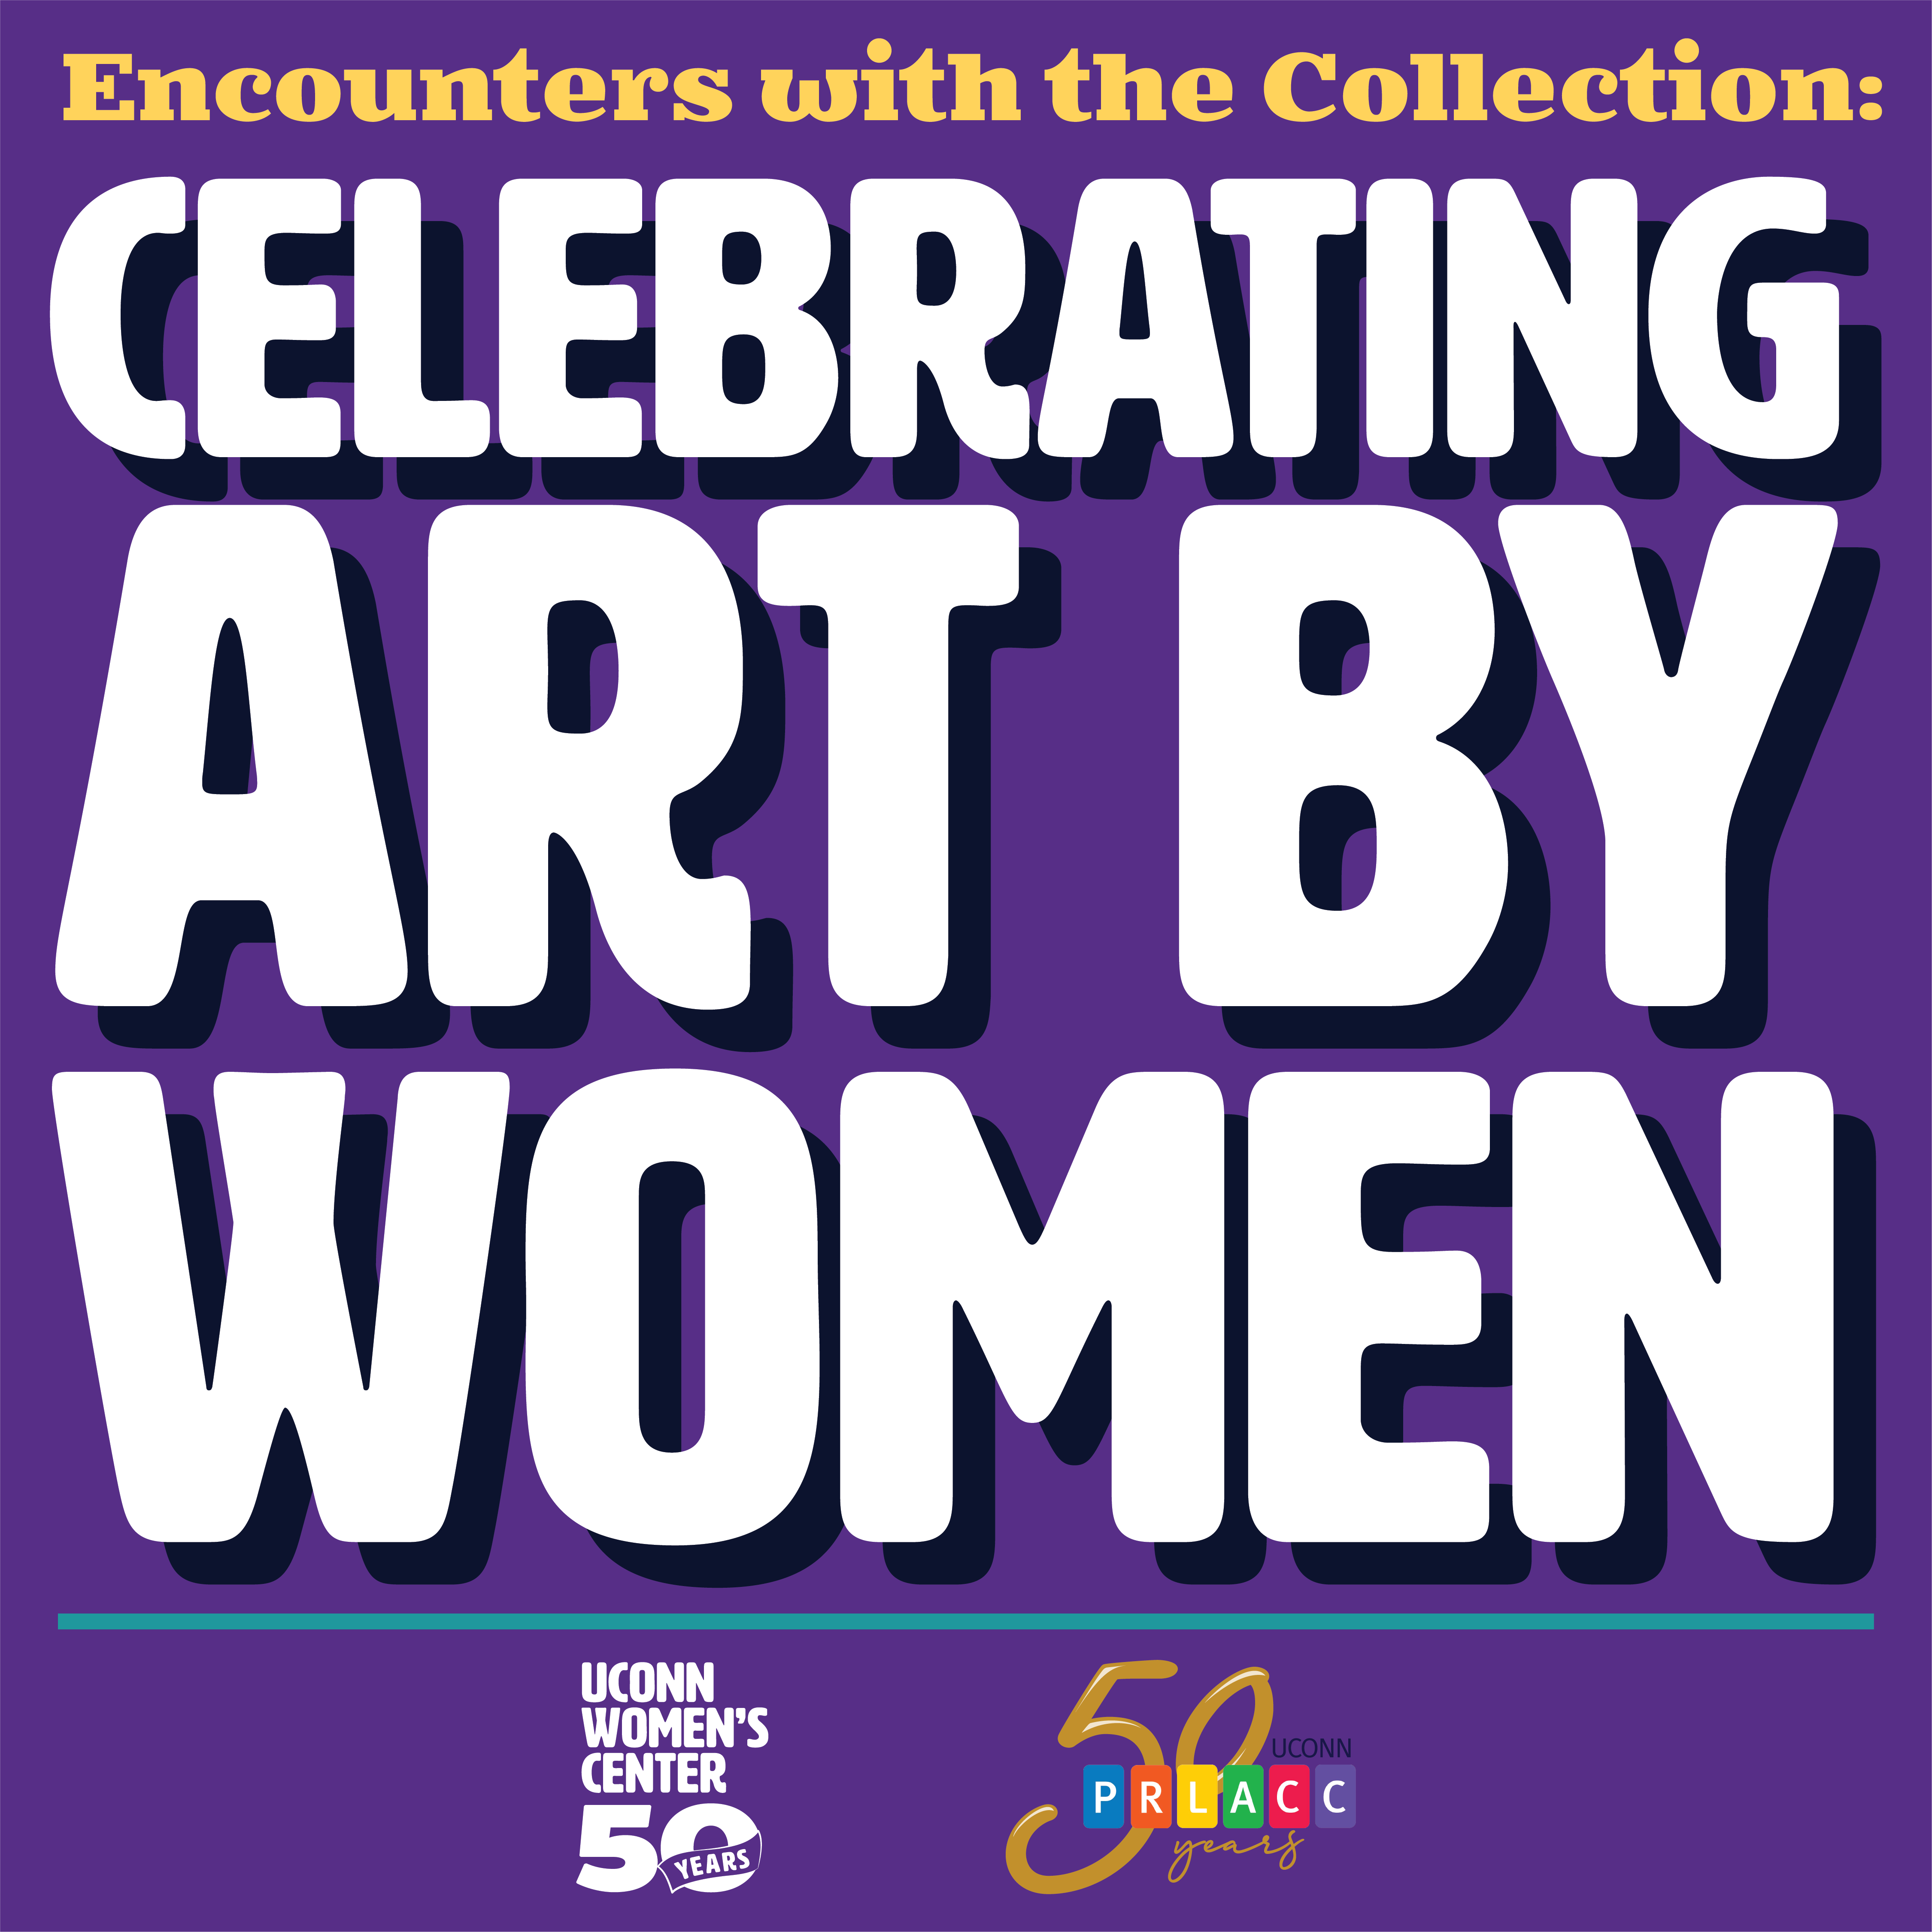 Graphic title for Encounters with the Collection: Celebrating Art by Women